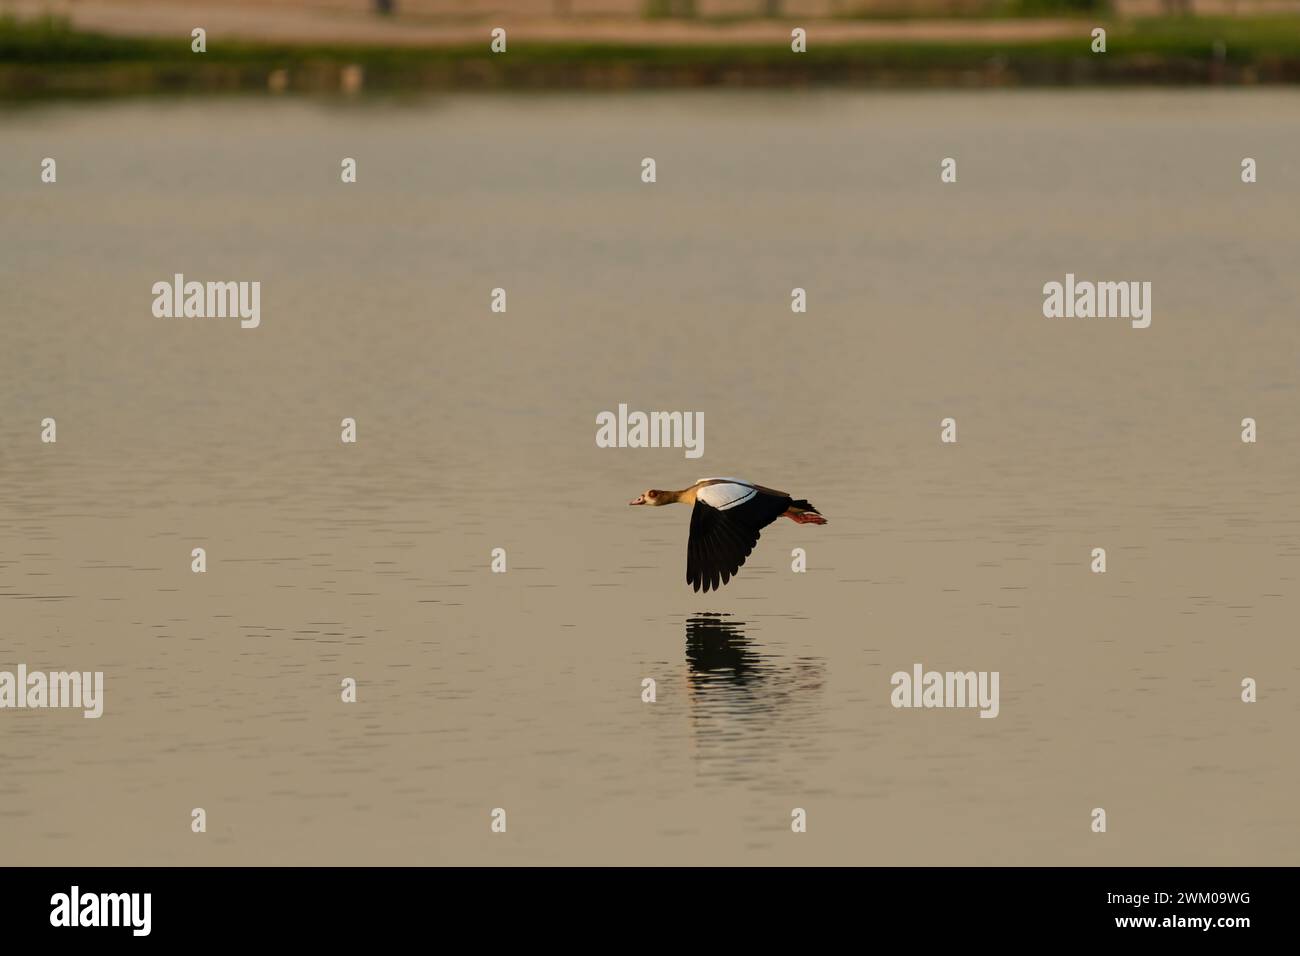 A lone Egyptian goose (Alopochen aegyptiaca) in flight over the waters of a lake at dusk at the Al Qudra Lakes in Dubai, United Arab Emirates. Stock Photo